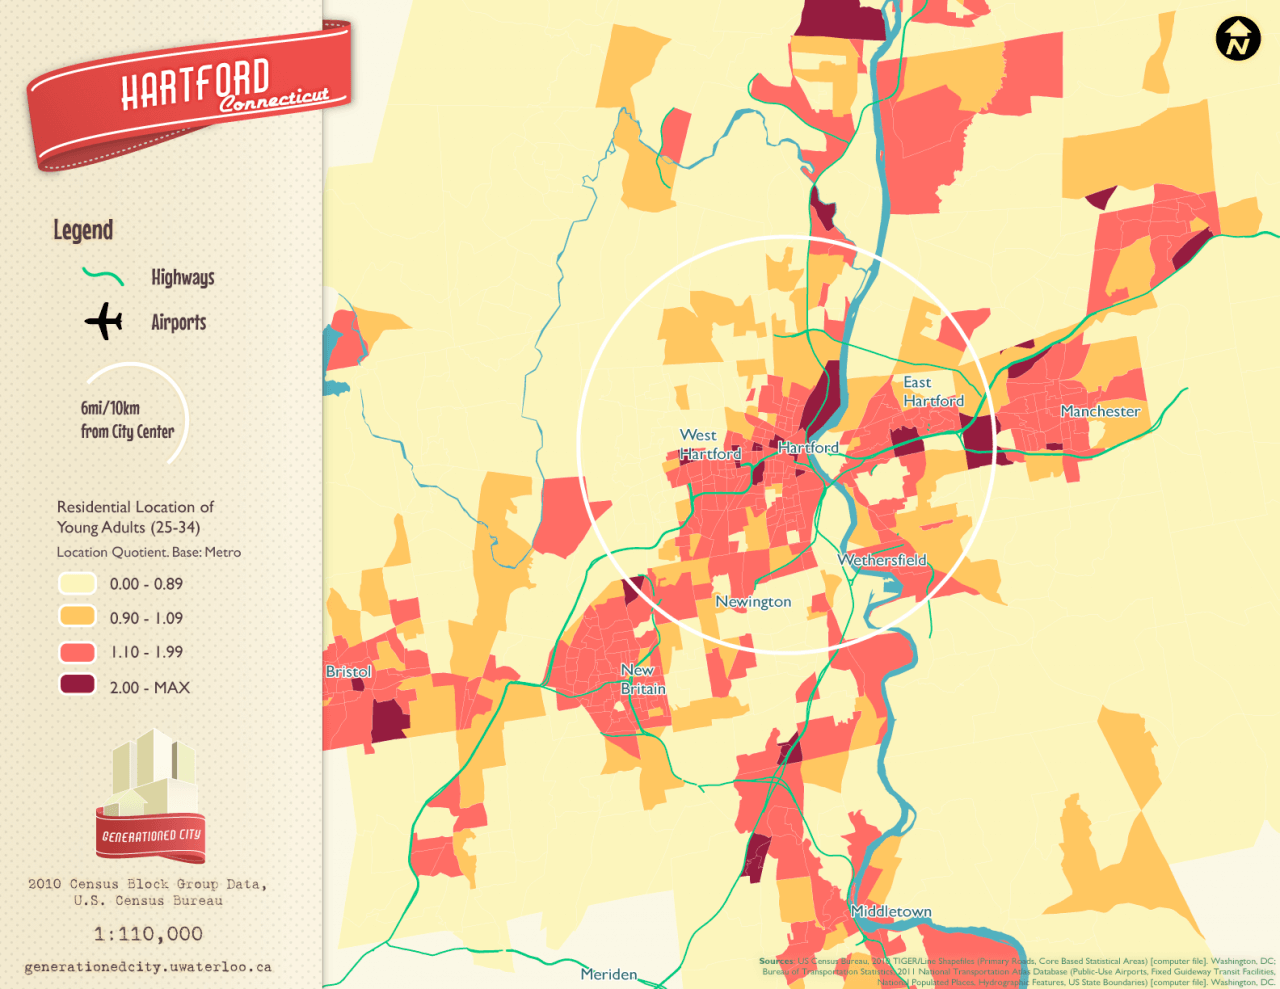 Residential location of young adults in Hartford.